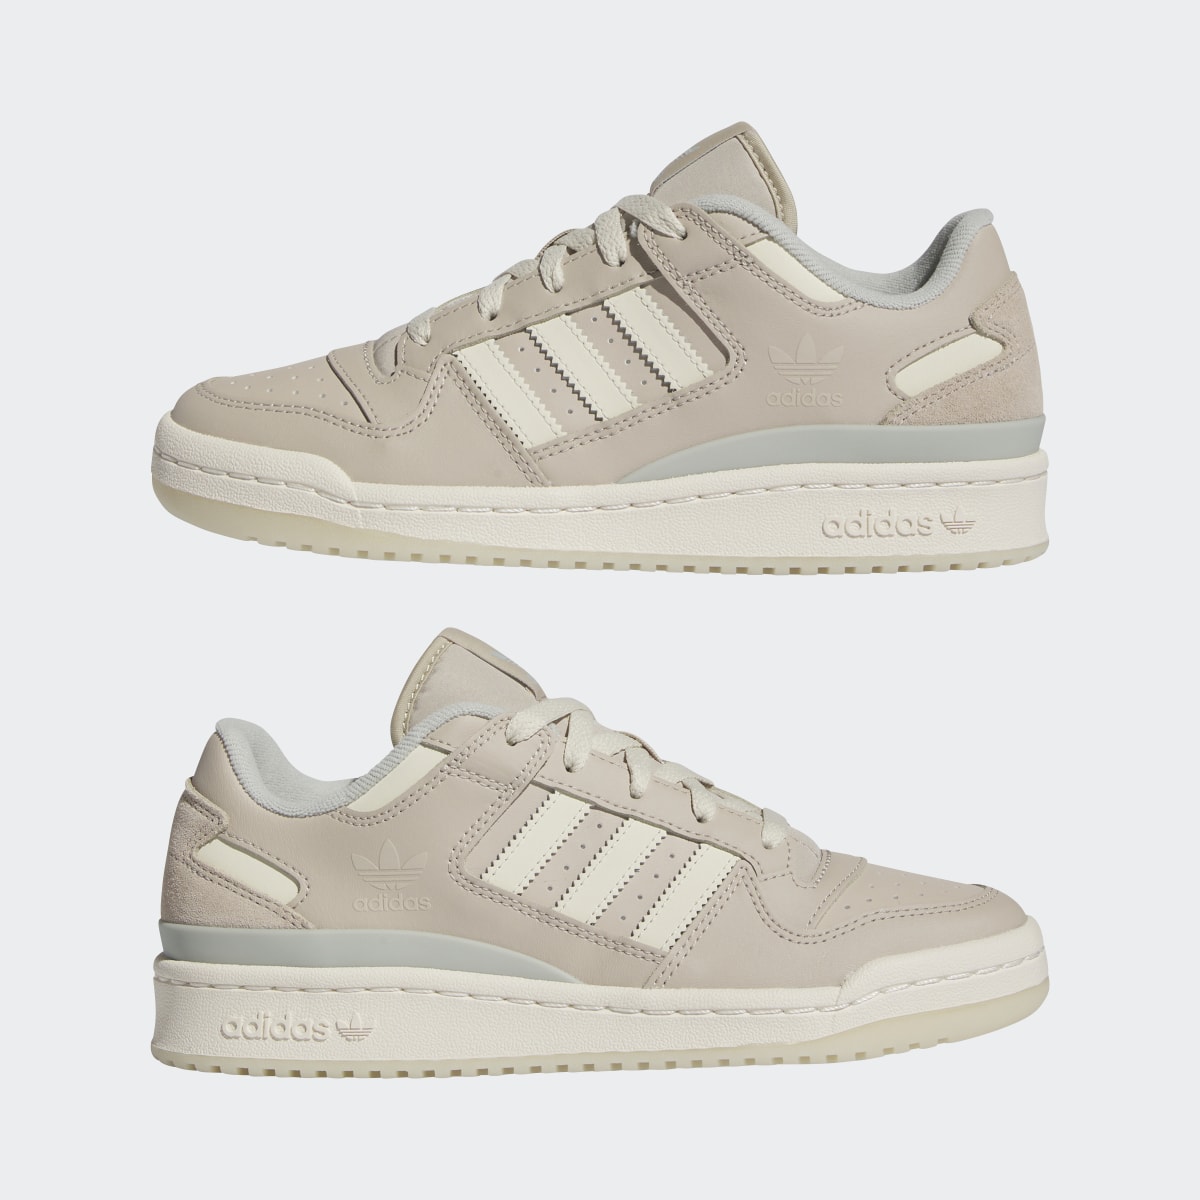 Adidas Forum Low Shoes. 11